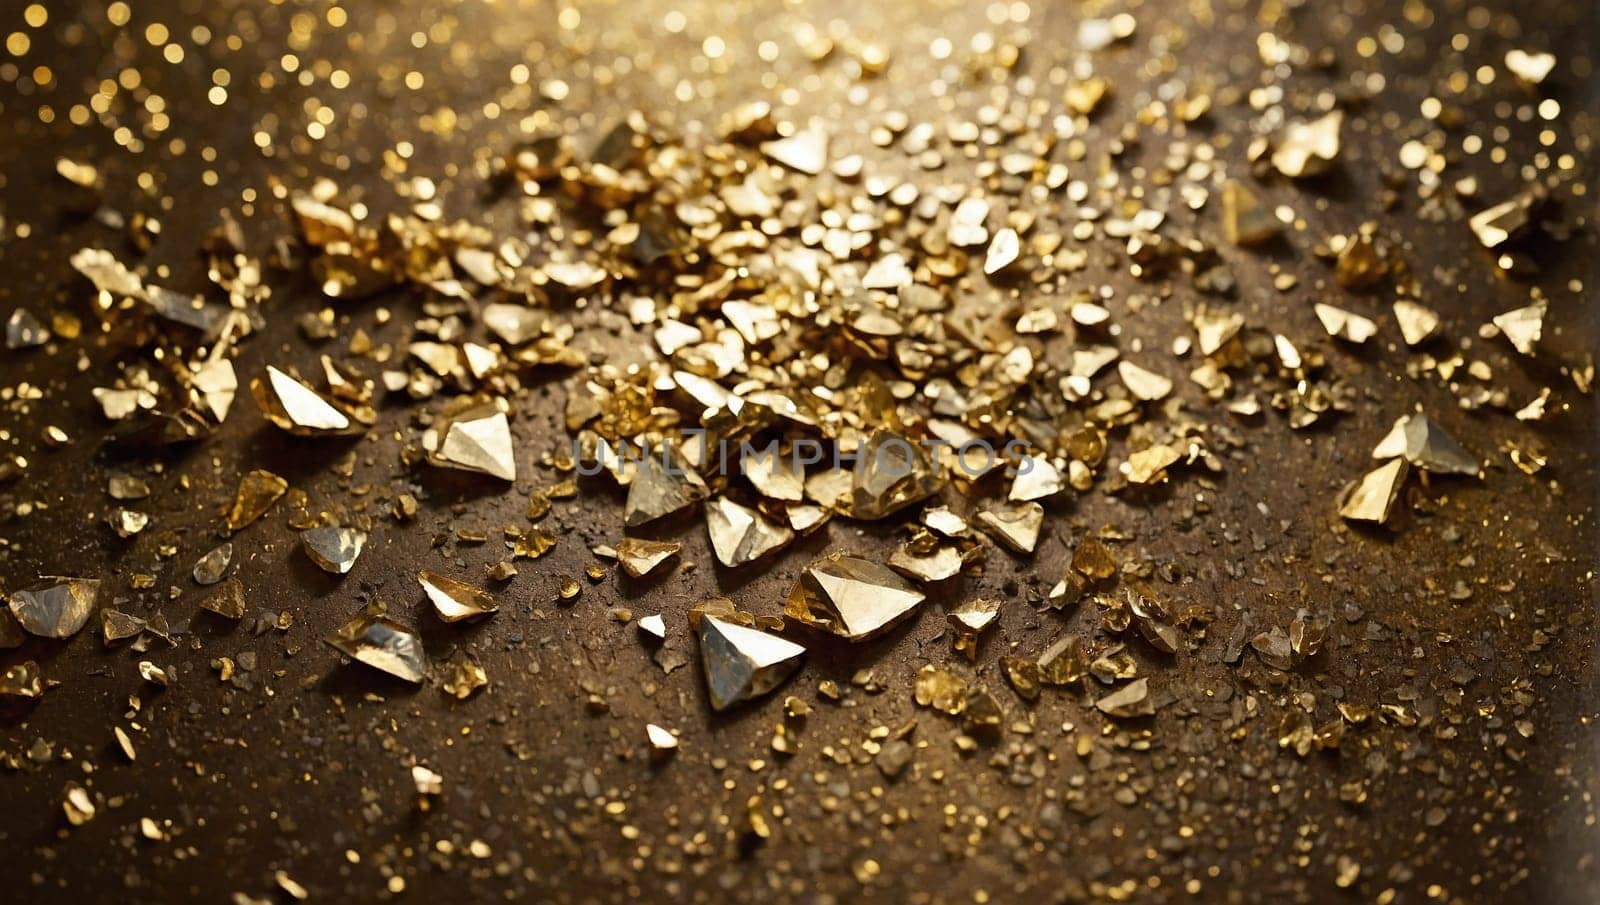 Gold metal crystal surface, metallic texture with visible crystals with sparkling light reflections in the background